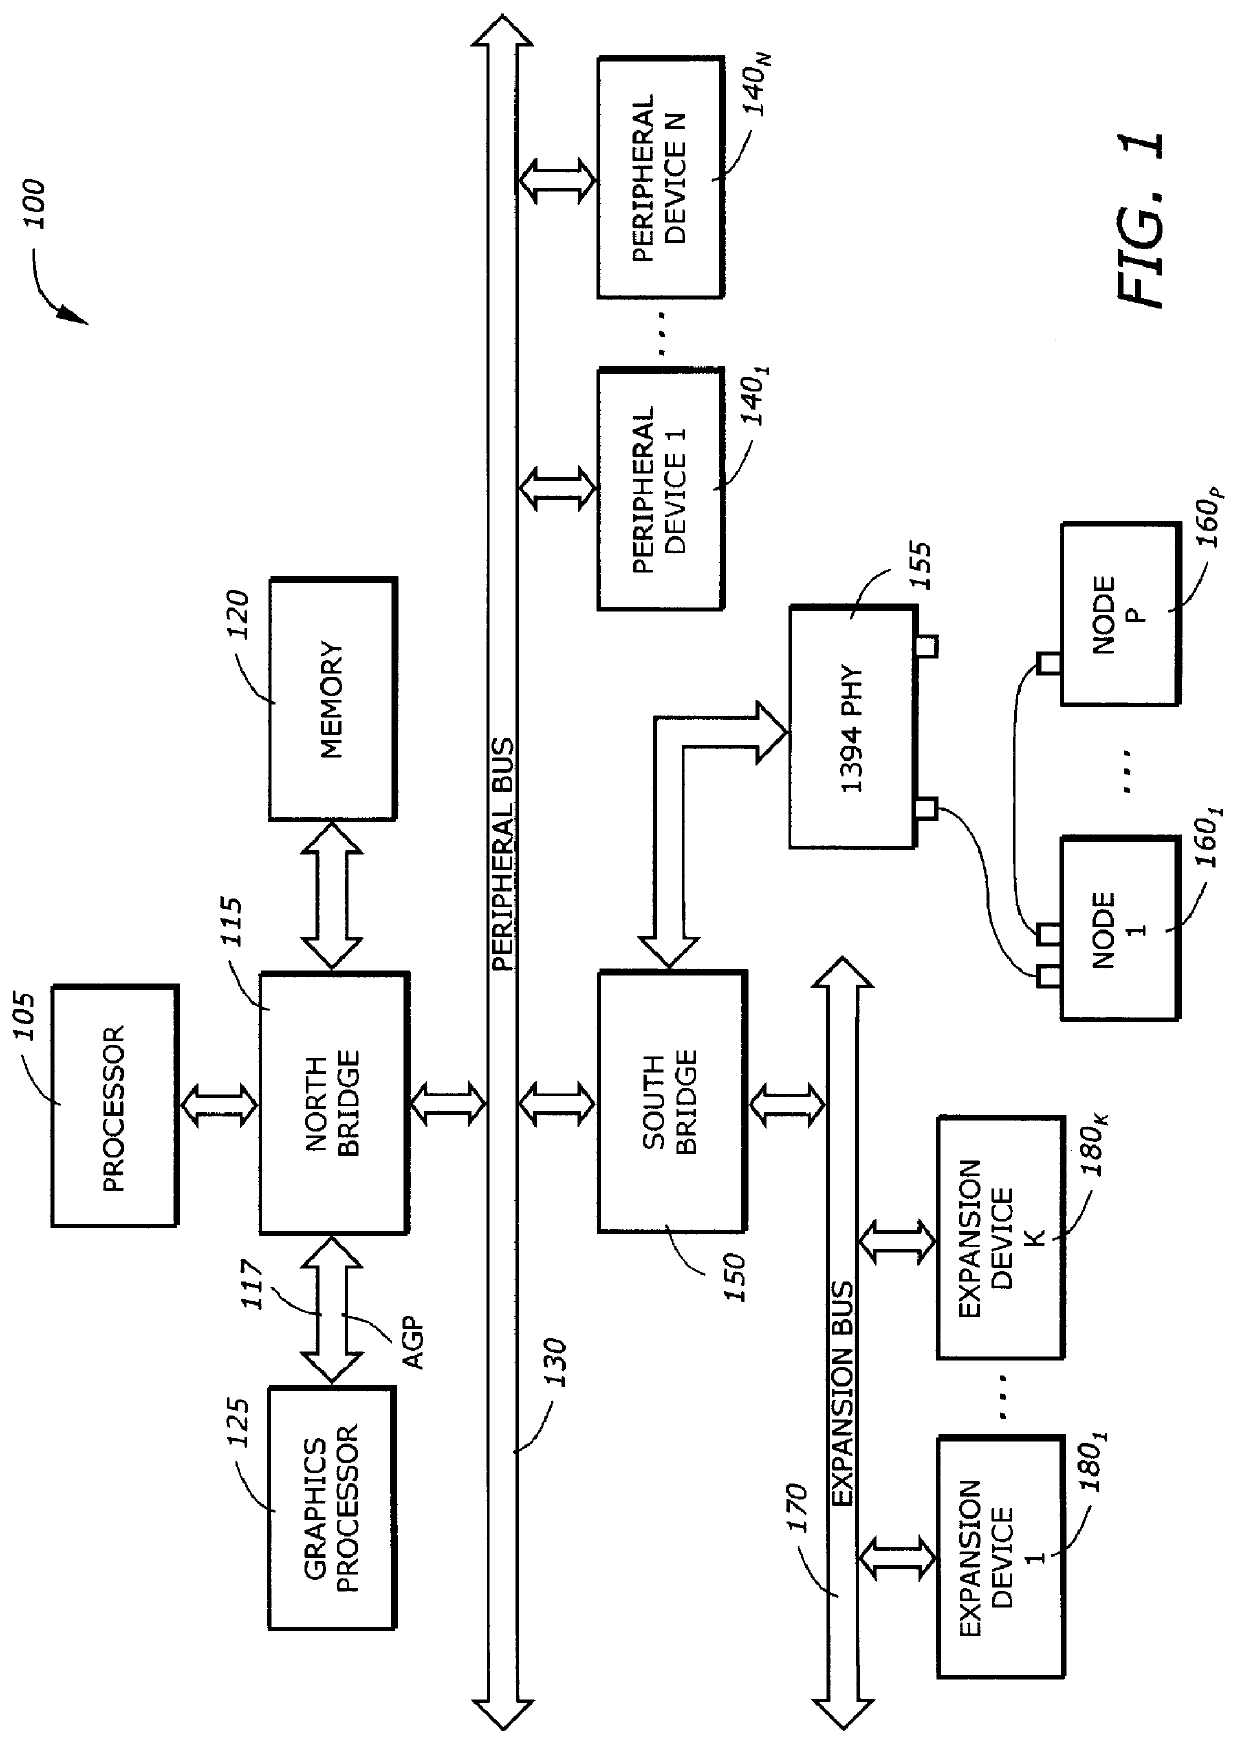 Method and apparatus for updating a timer from multiple timing domains